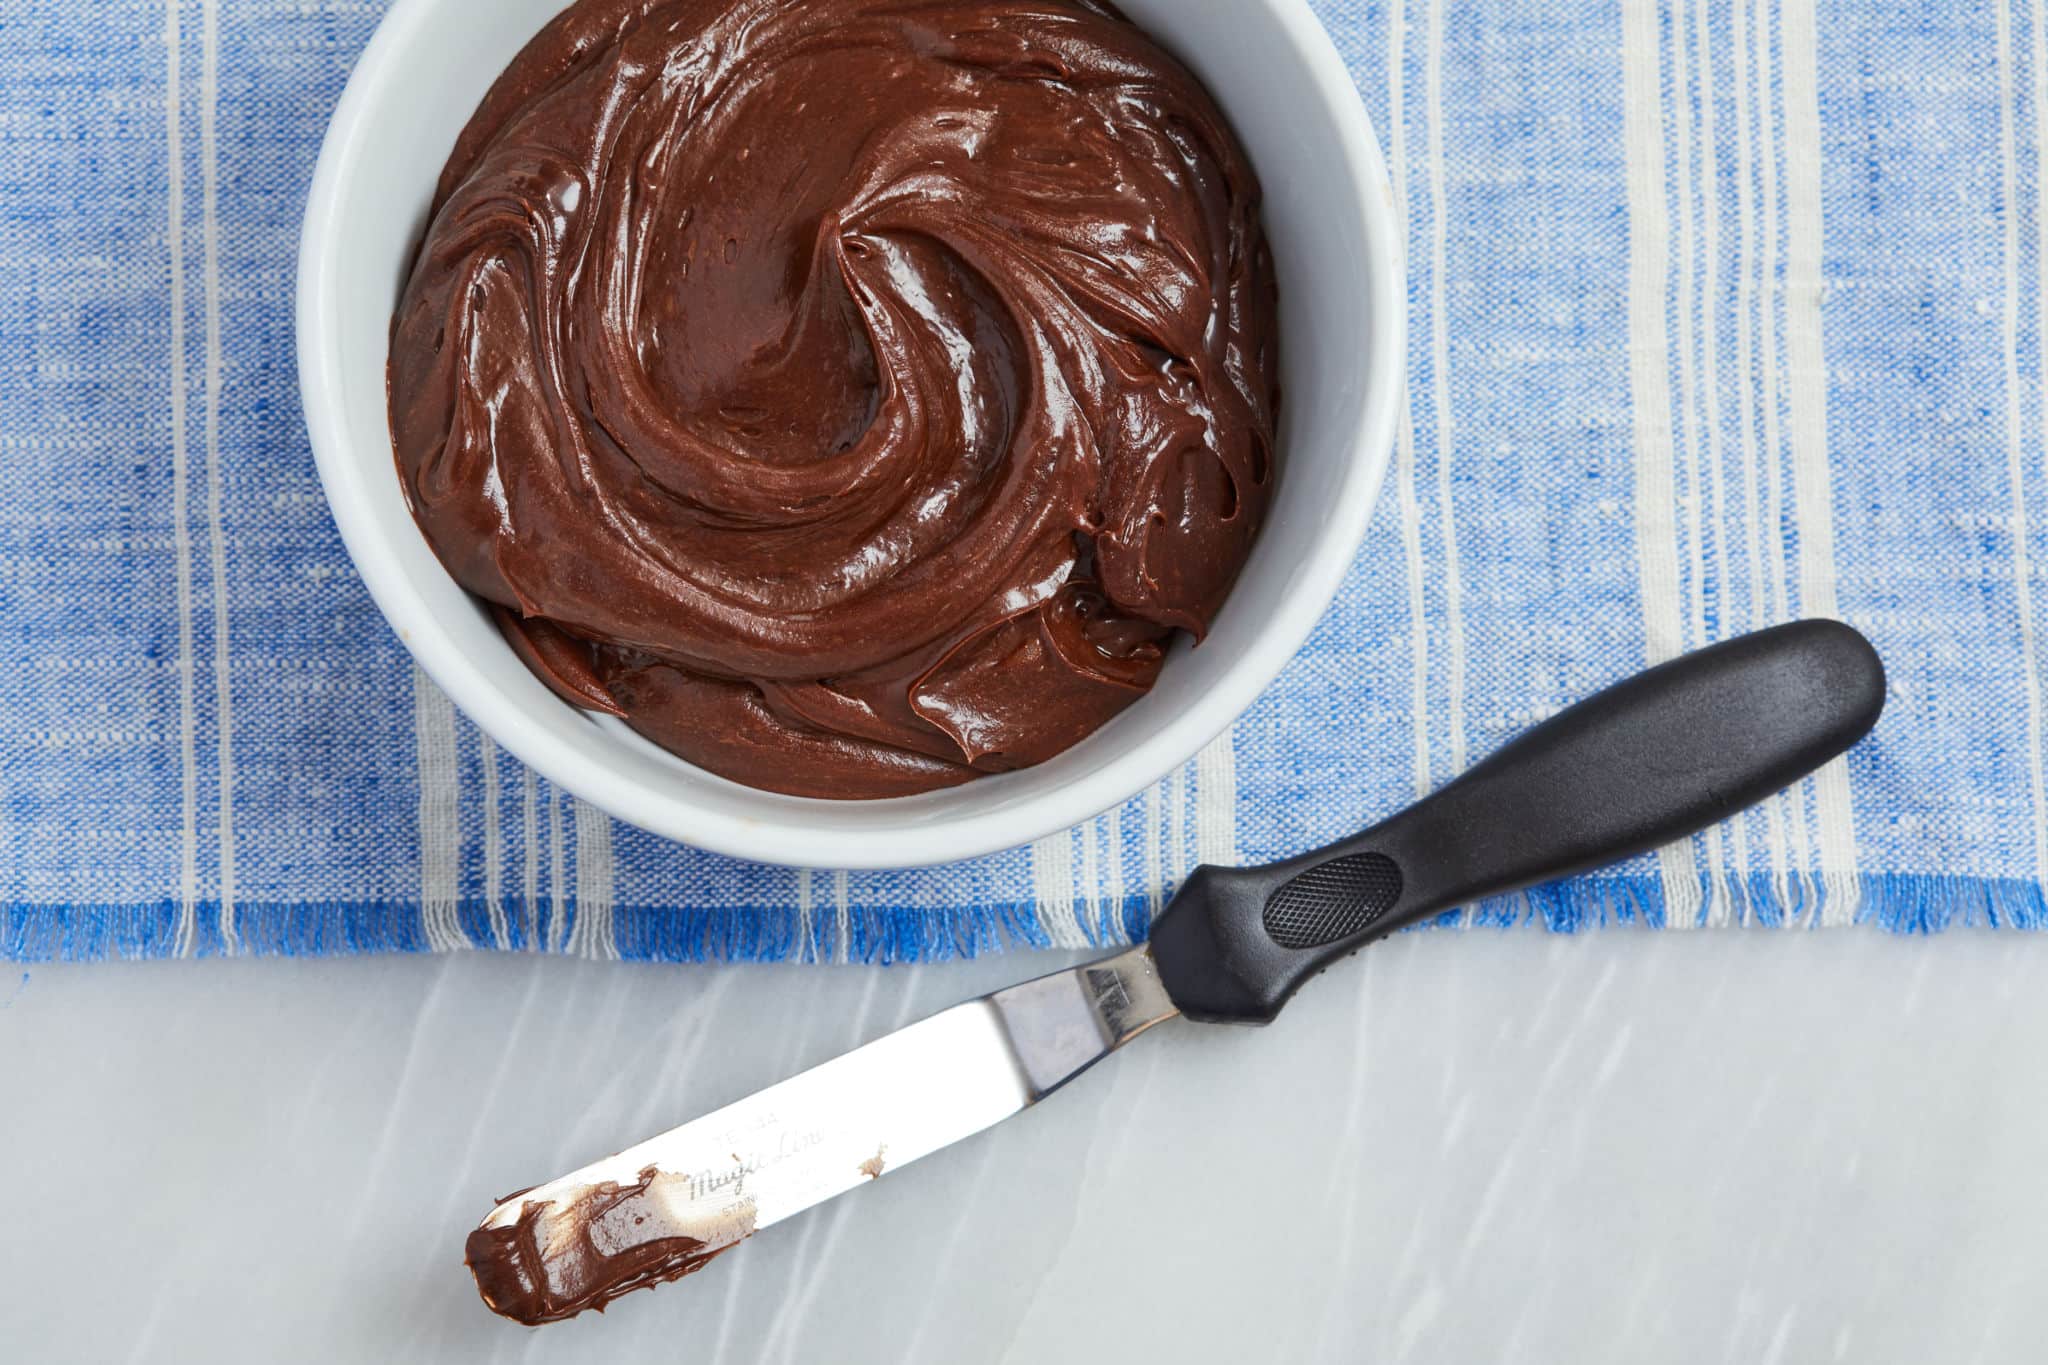 A bowl of chocolate buttercream frosting.